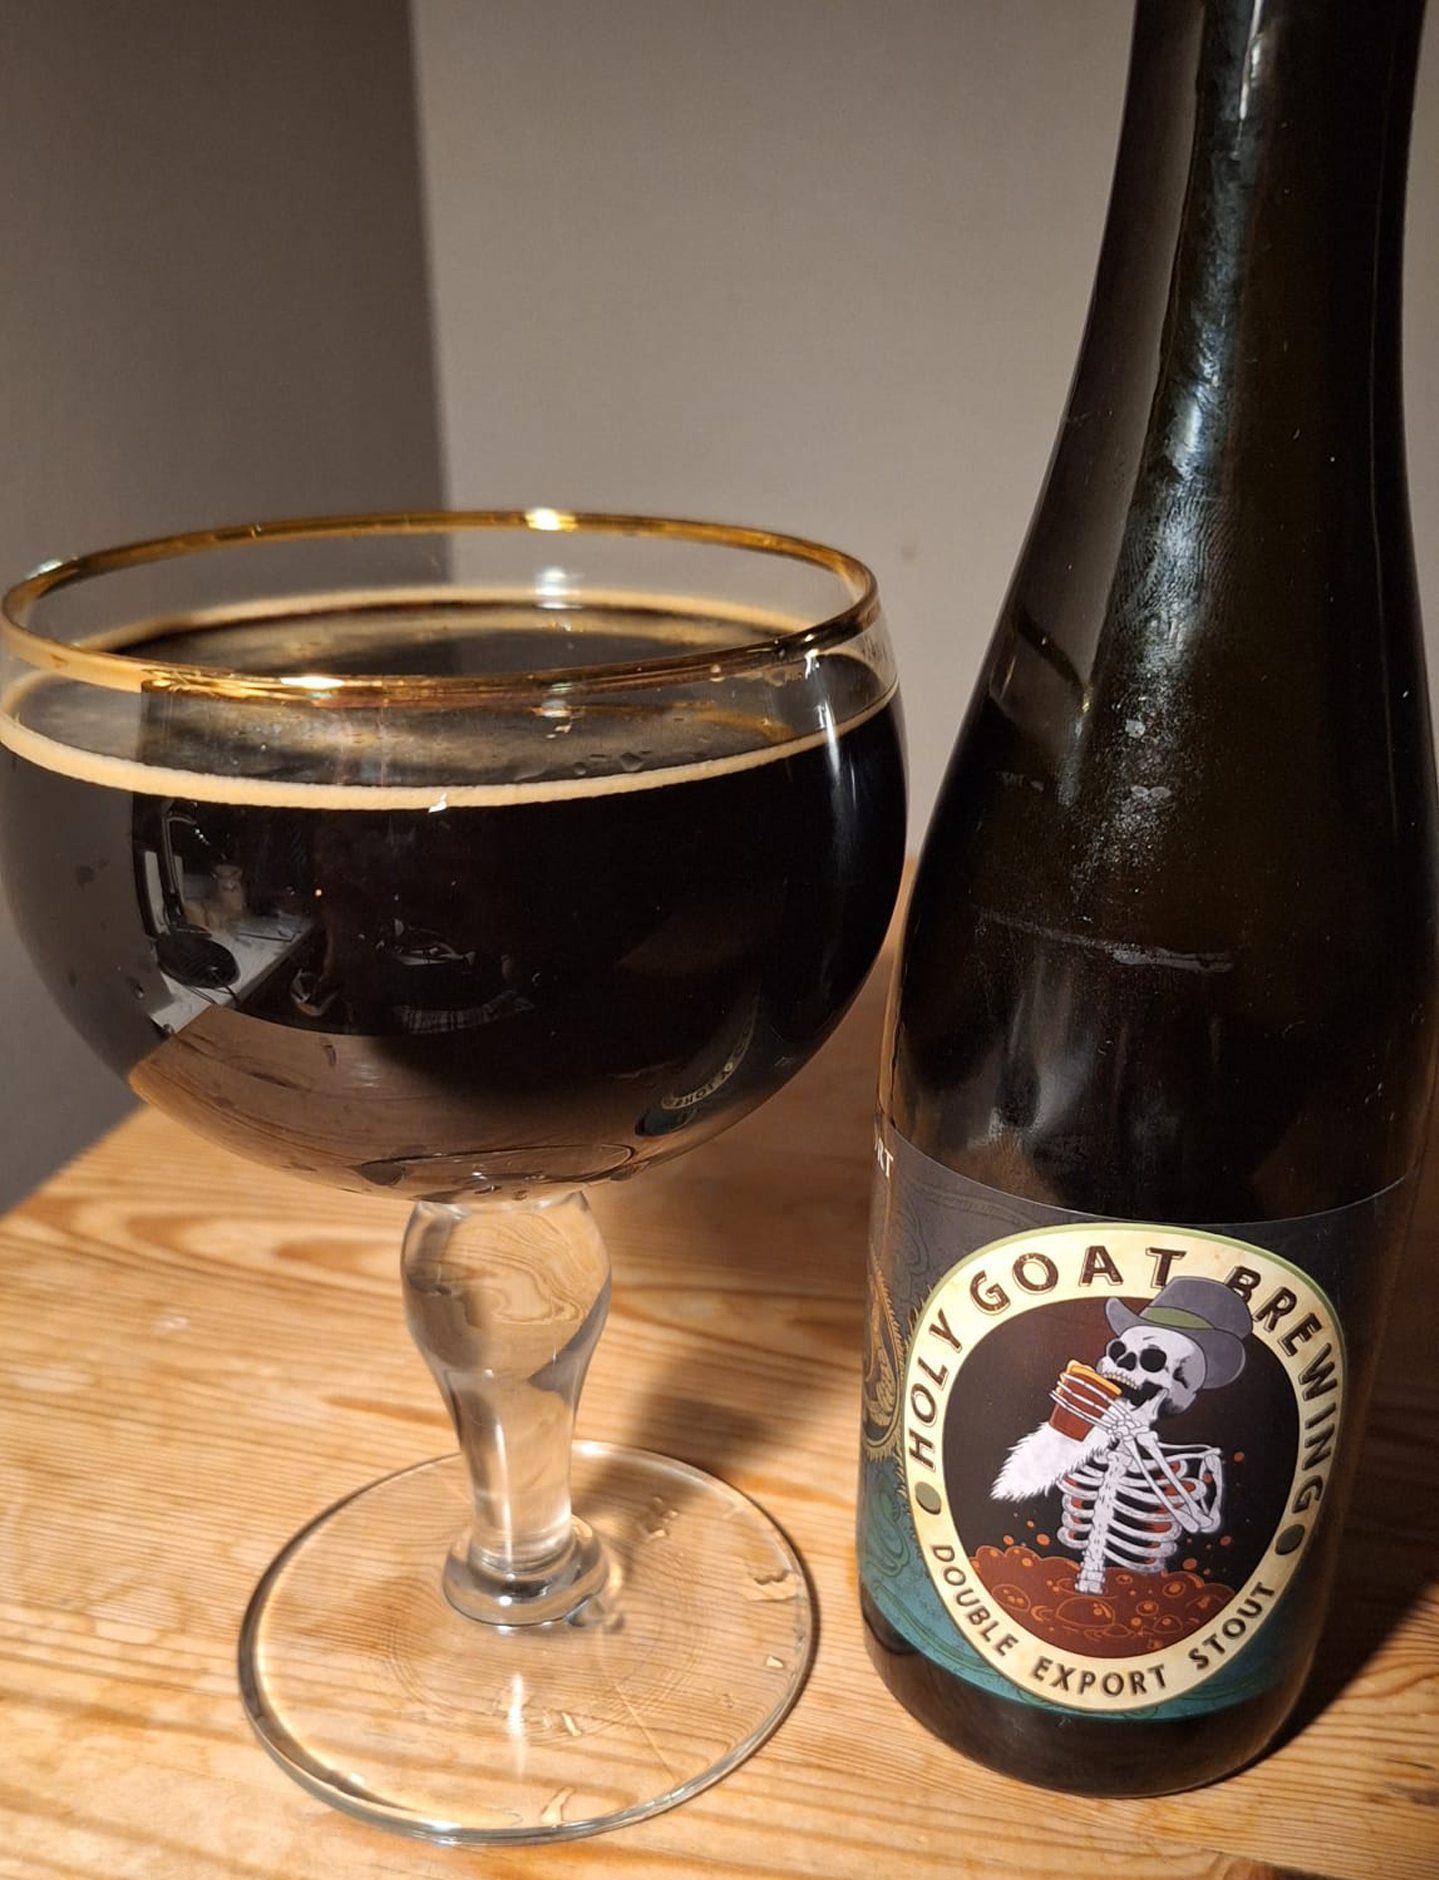 1867 Double Export Stout poured into a glass. 